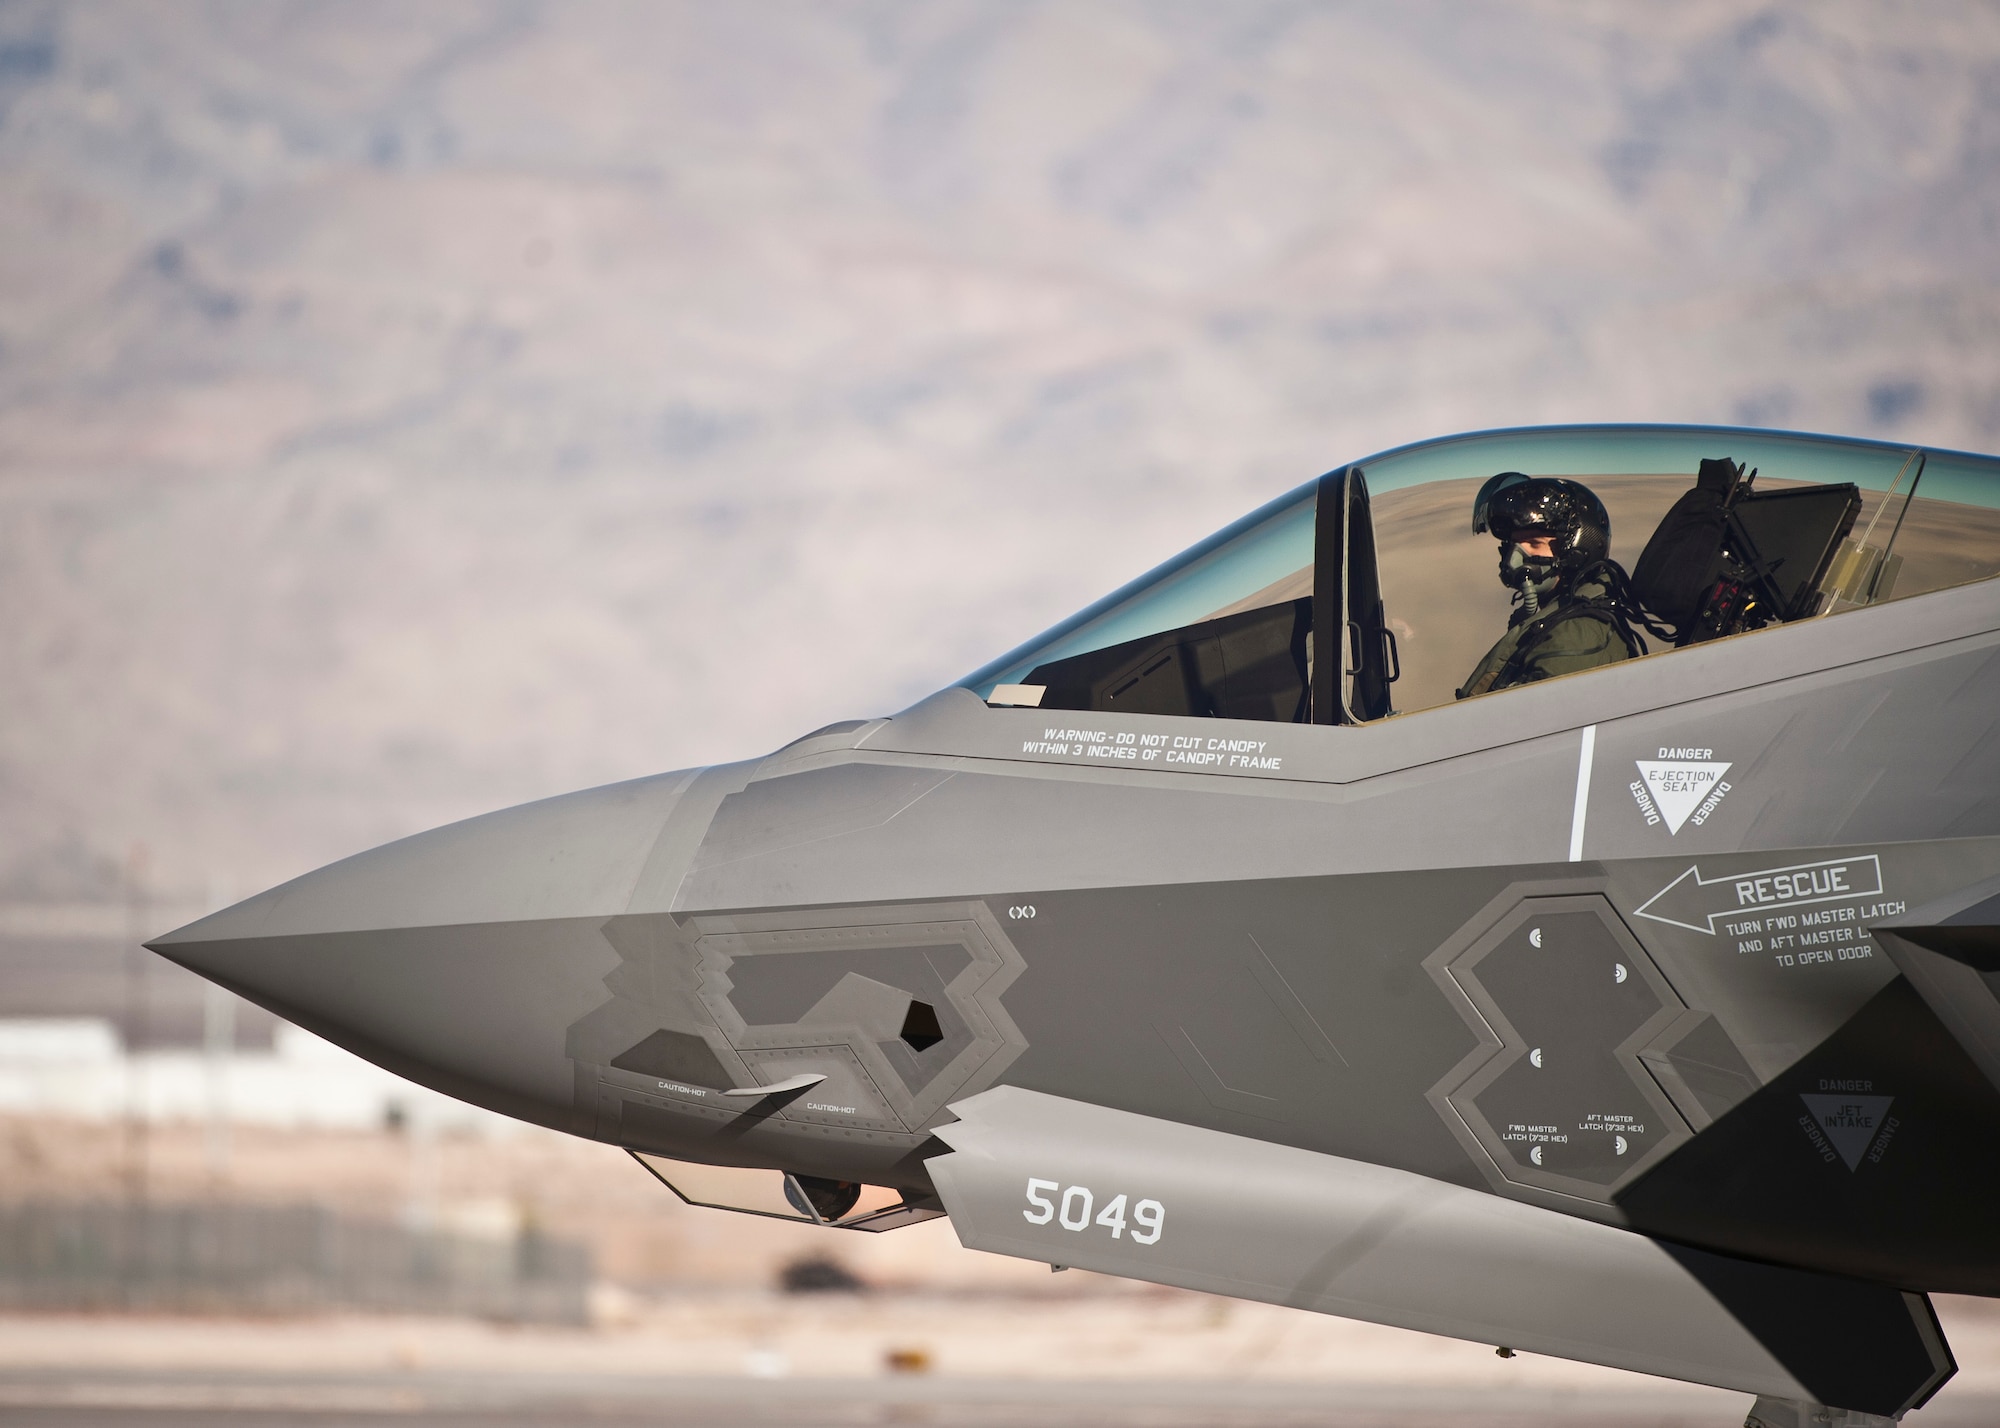 Capt. Brent Golden taxies an F-35A Lightning II at Nellis Air Force Base, Nev., Jan. 15, 2015. The F-35 that Golden, a 16th Weapons Squadron instructor, flew is the U.S. Air Force Weapons School’s first assigned F-35. (U.S. Air Force photo/Staff Sgt. Siuta B. Ika) 